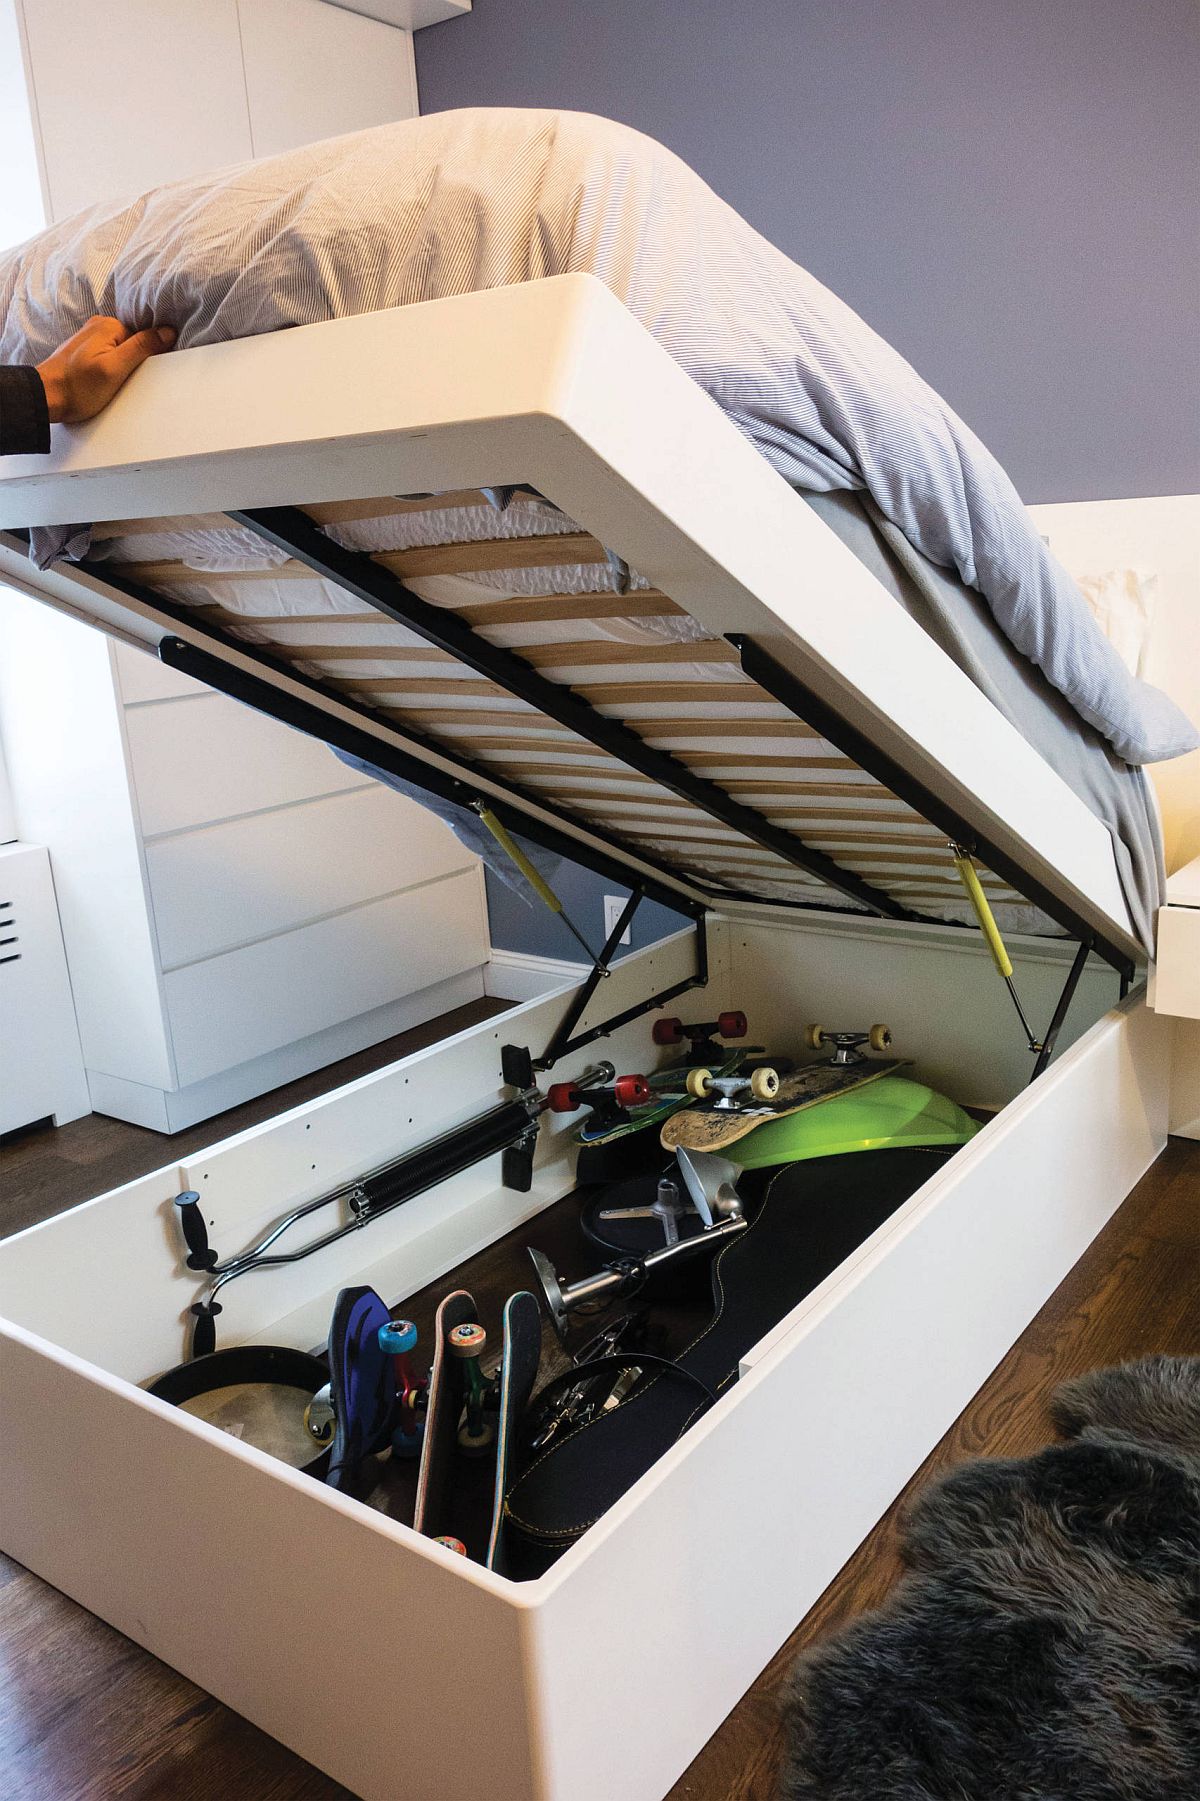 Custom bed frame allows you to store things that are not in regular use